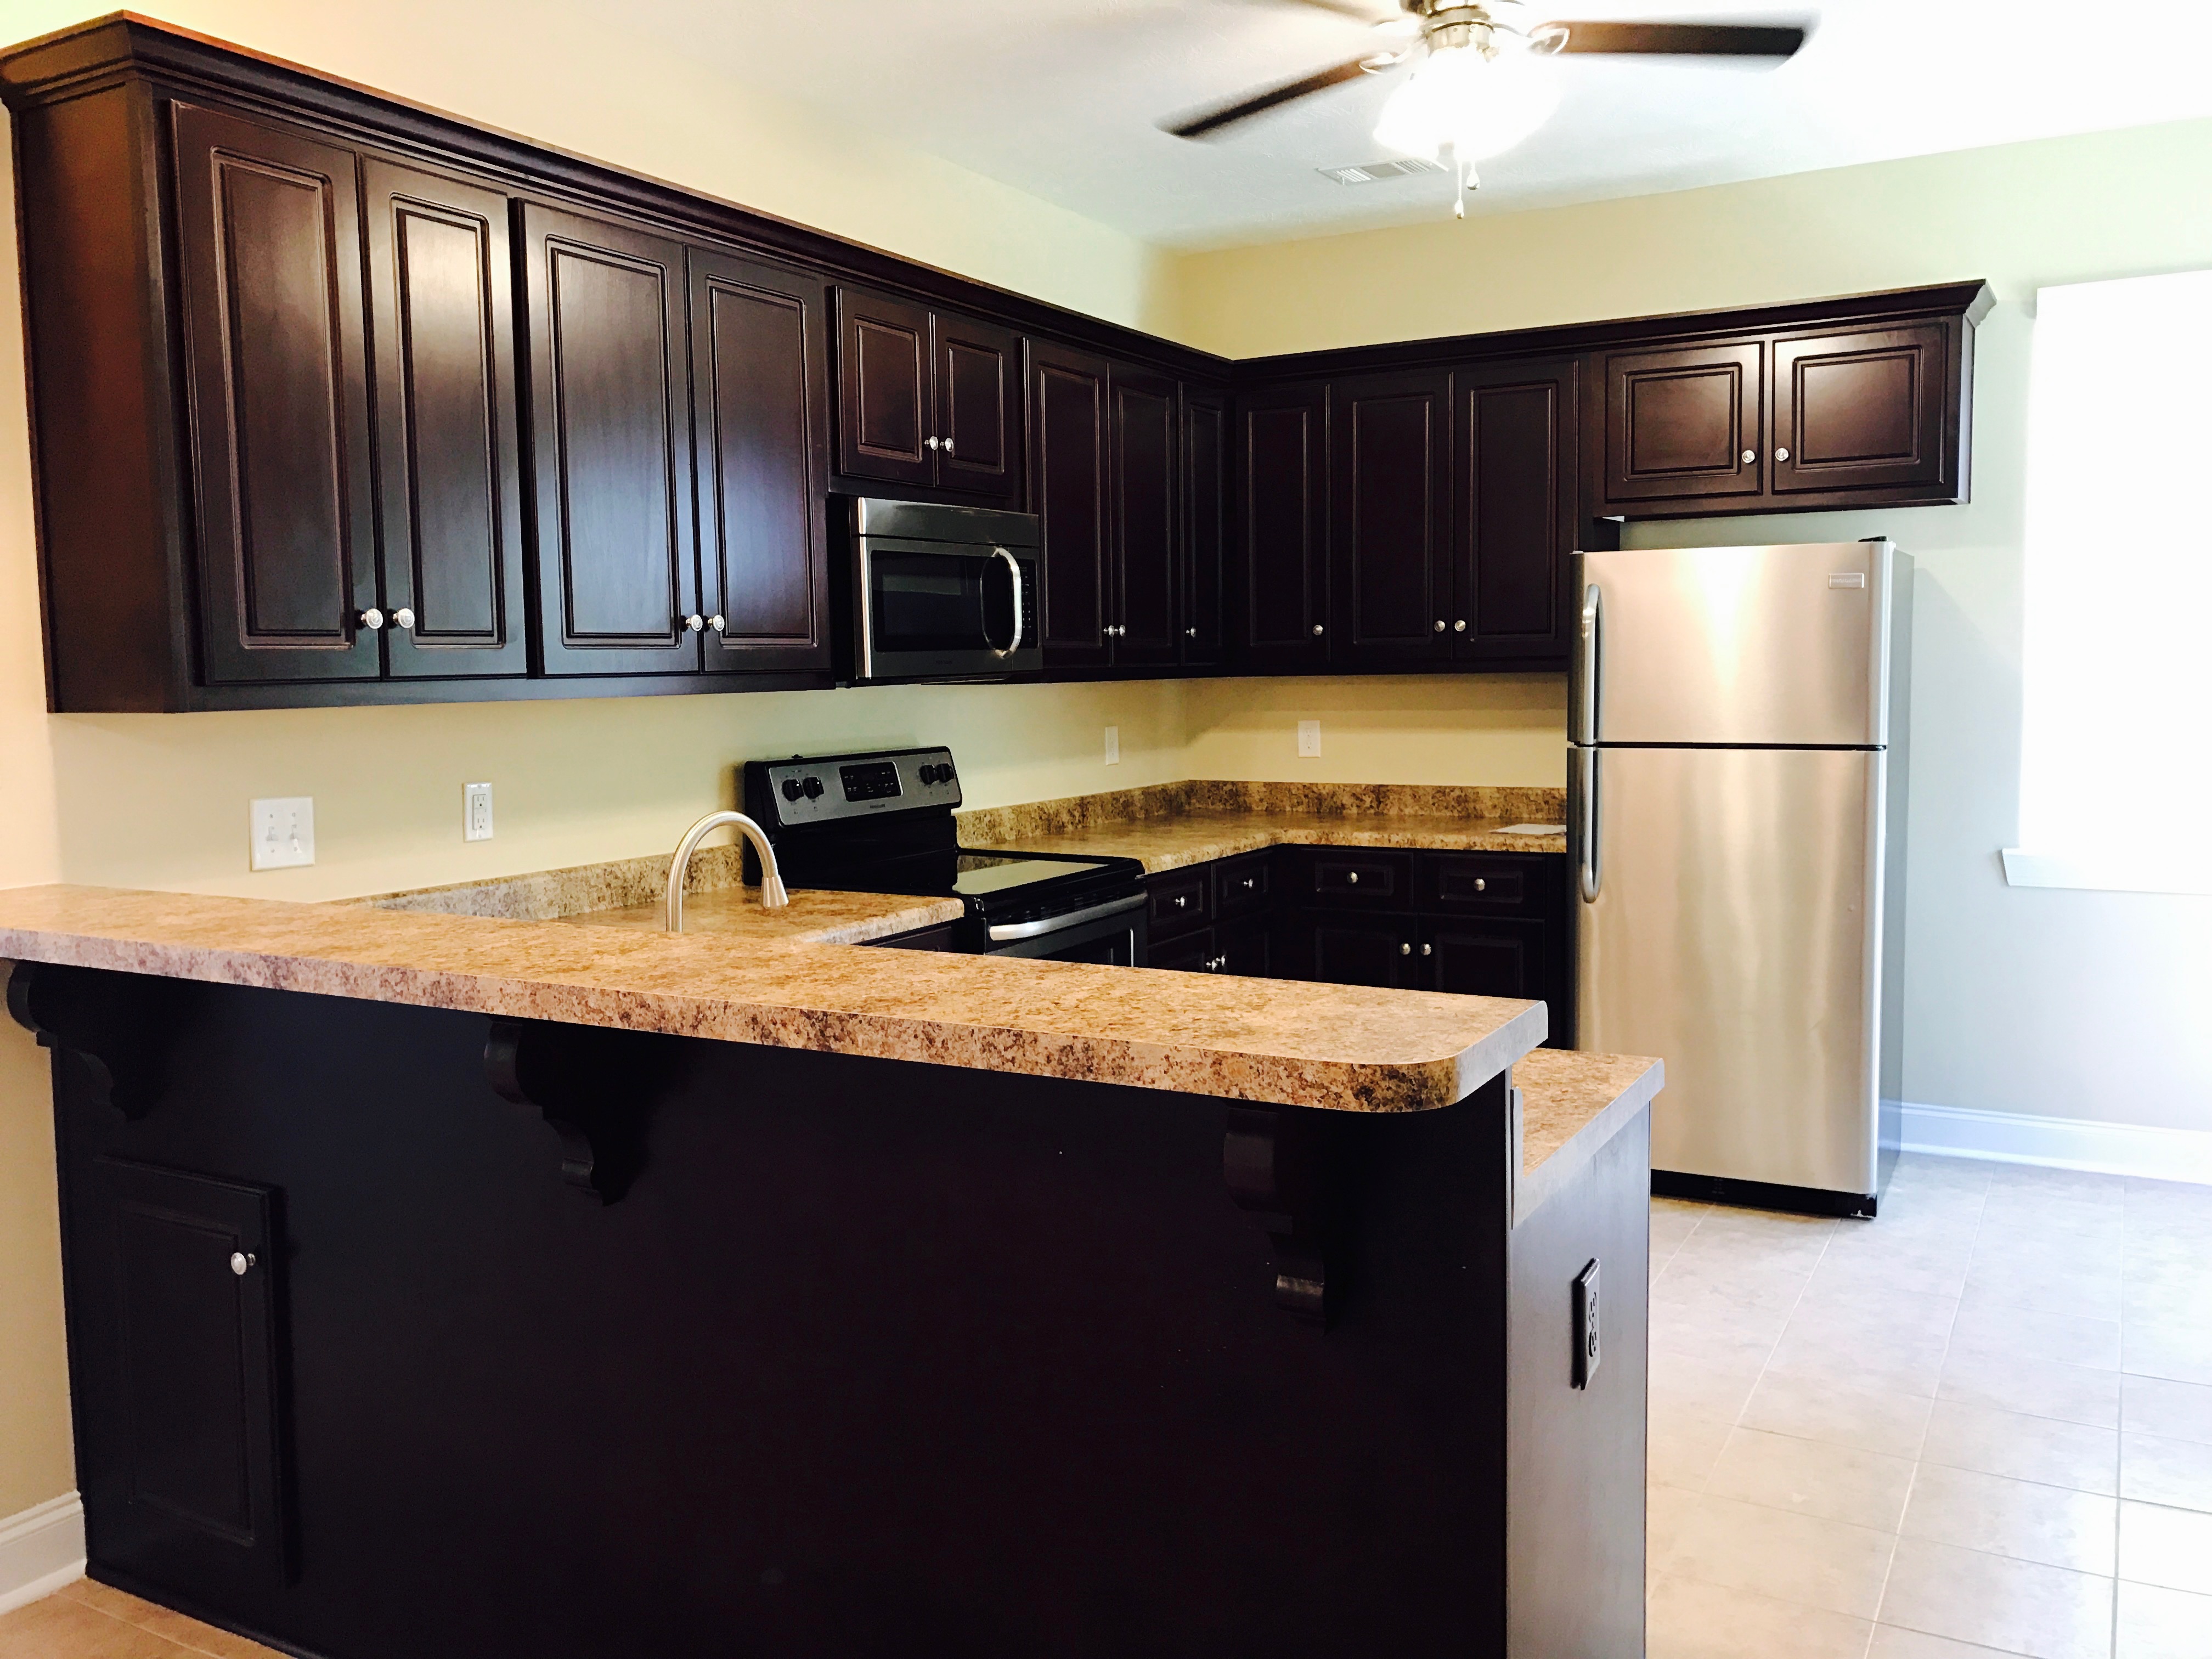 new kitchen with dark cabinets and breakfast bar general contractor augusta blount's complete home services fire water restoration termite pest control augusta ga